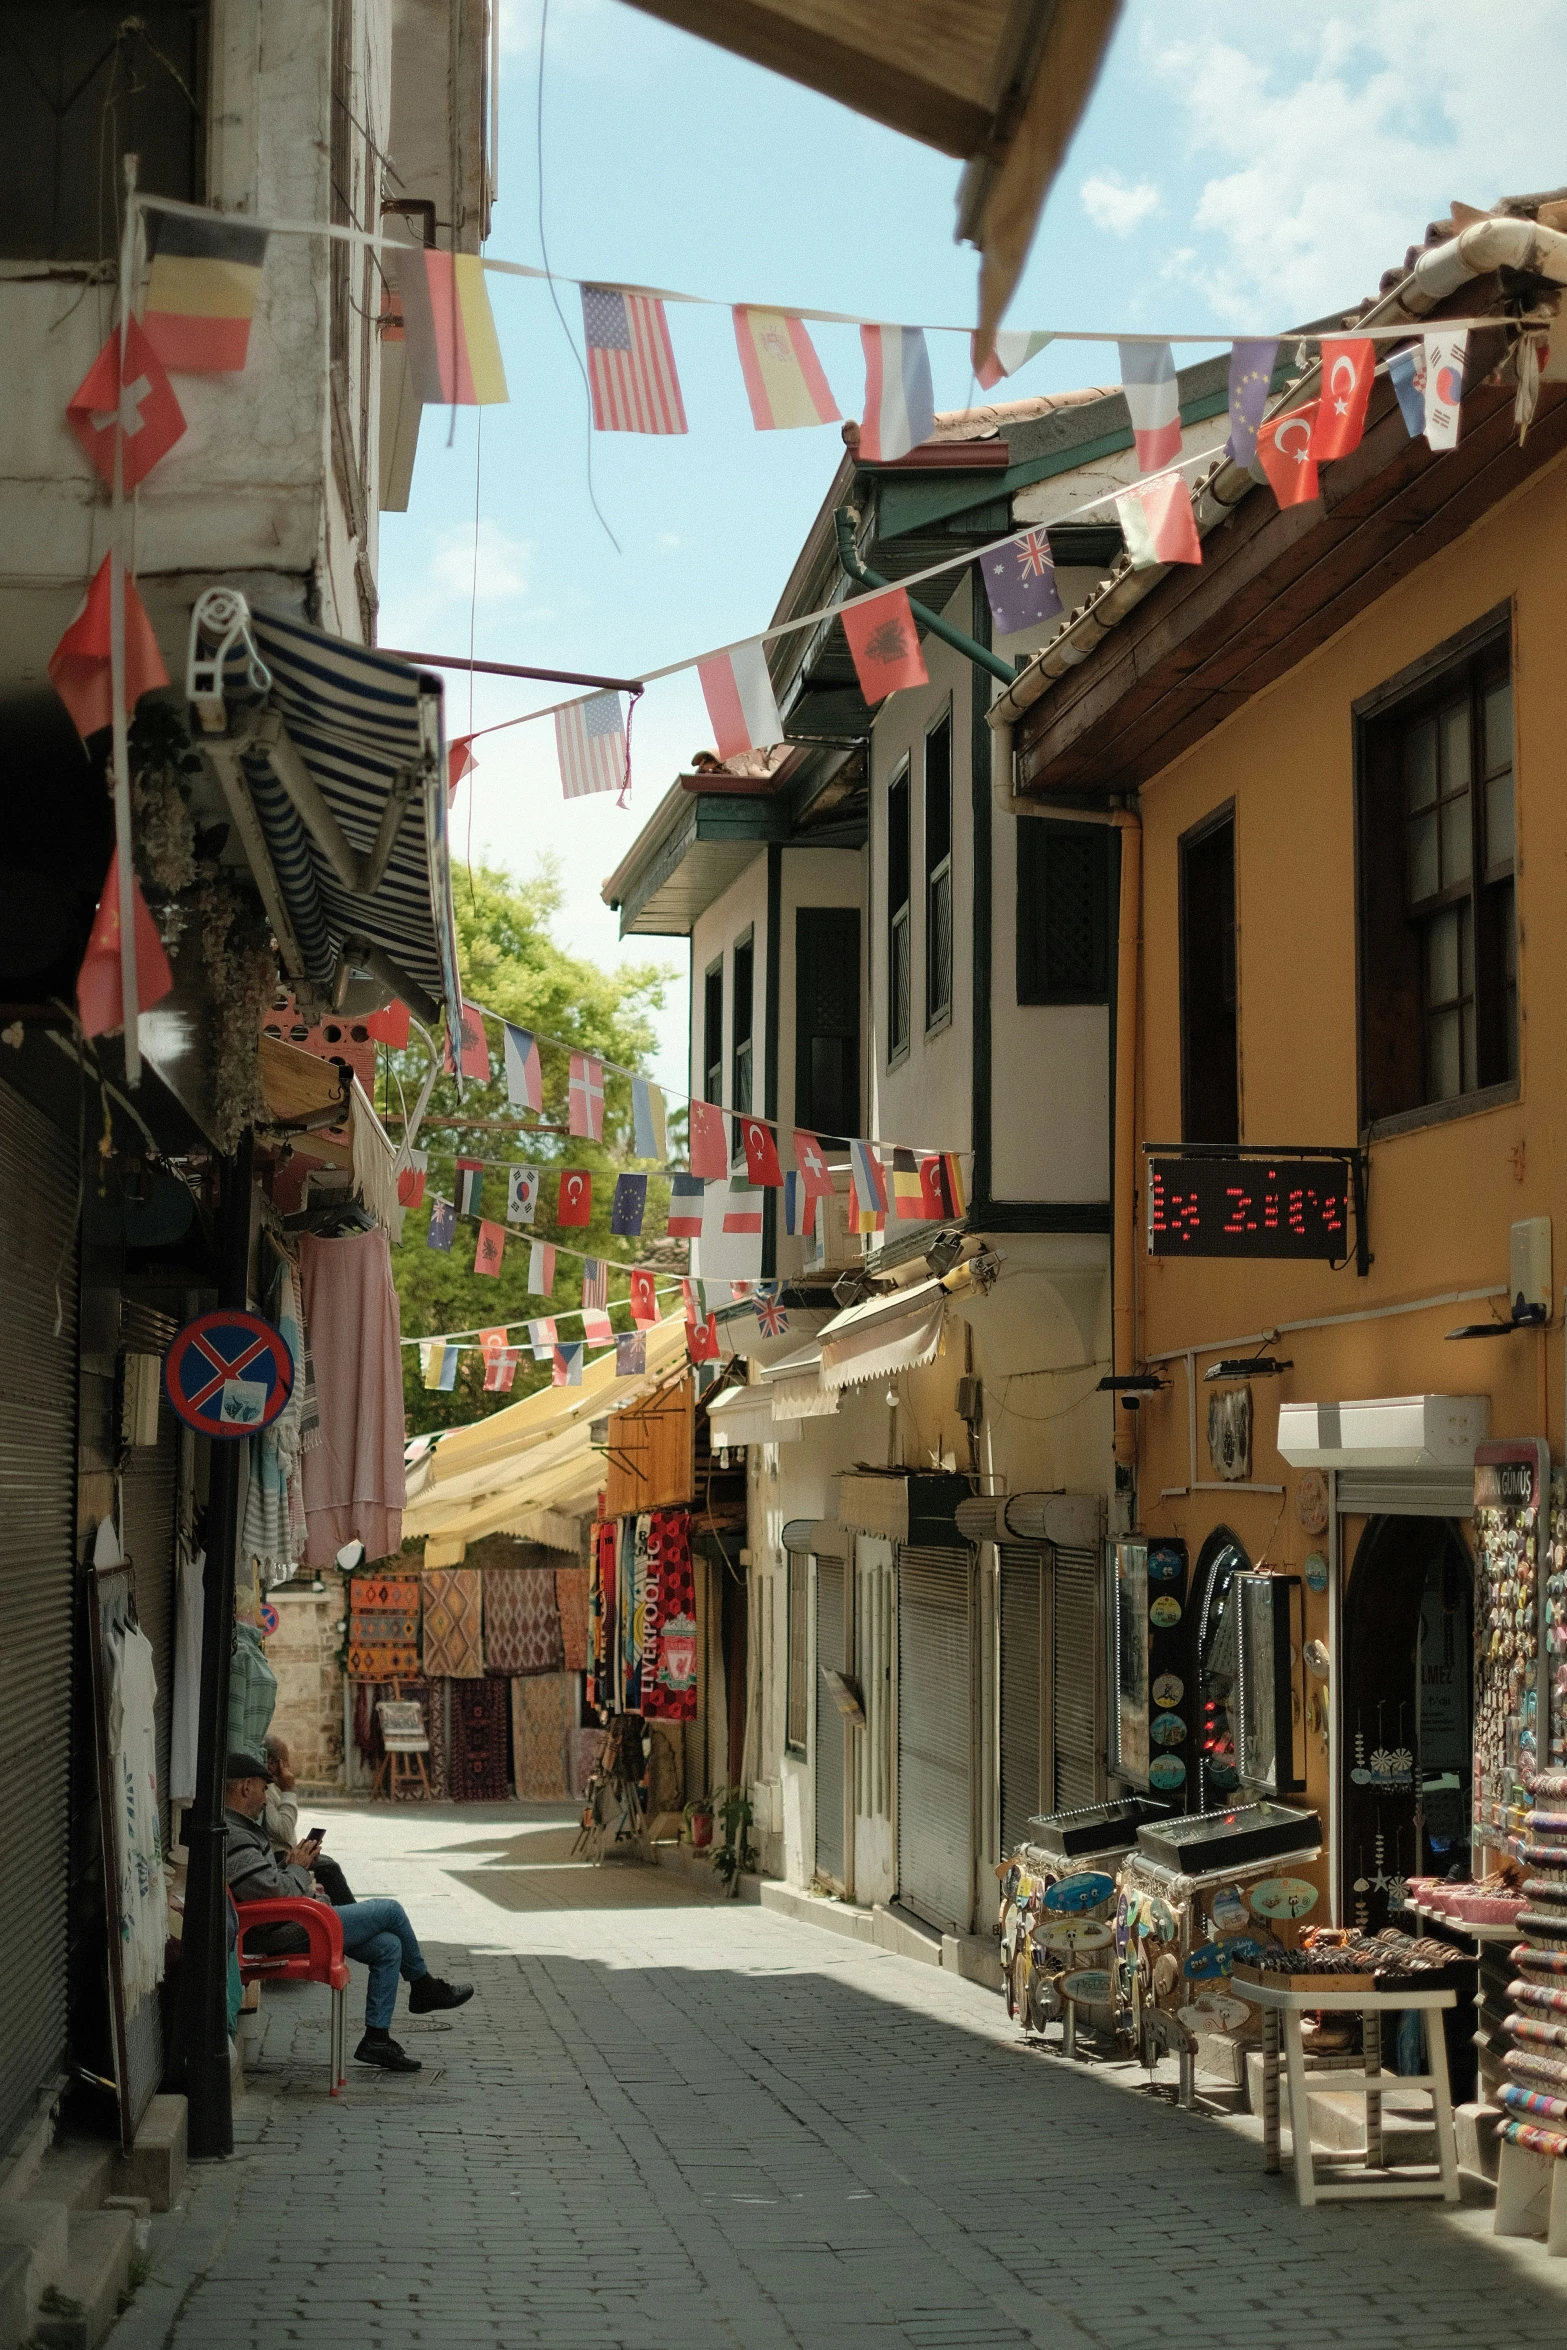 a street scene in a city with flags hanging in the air